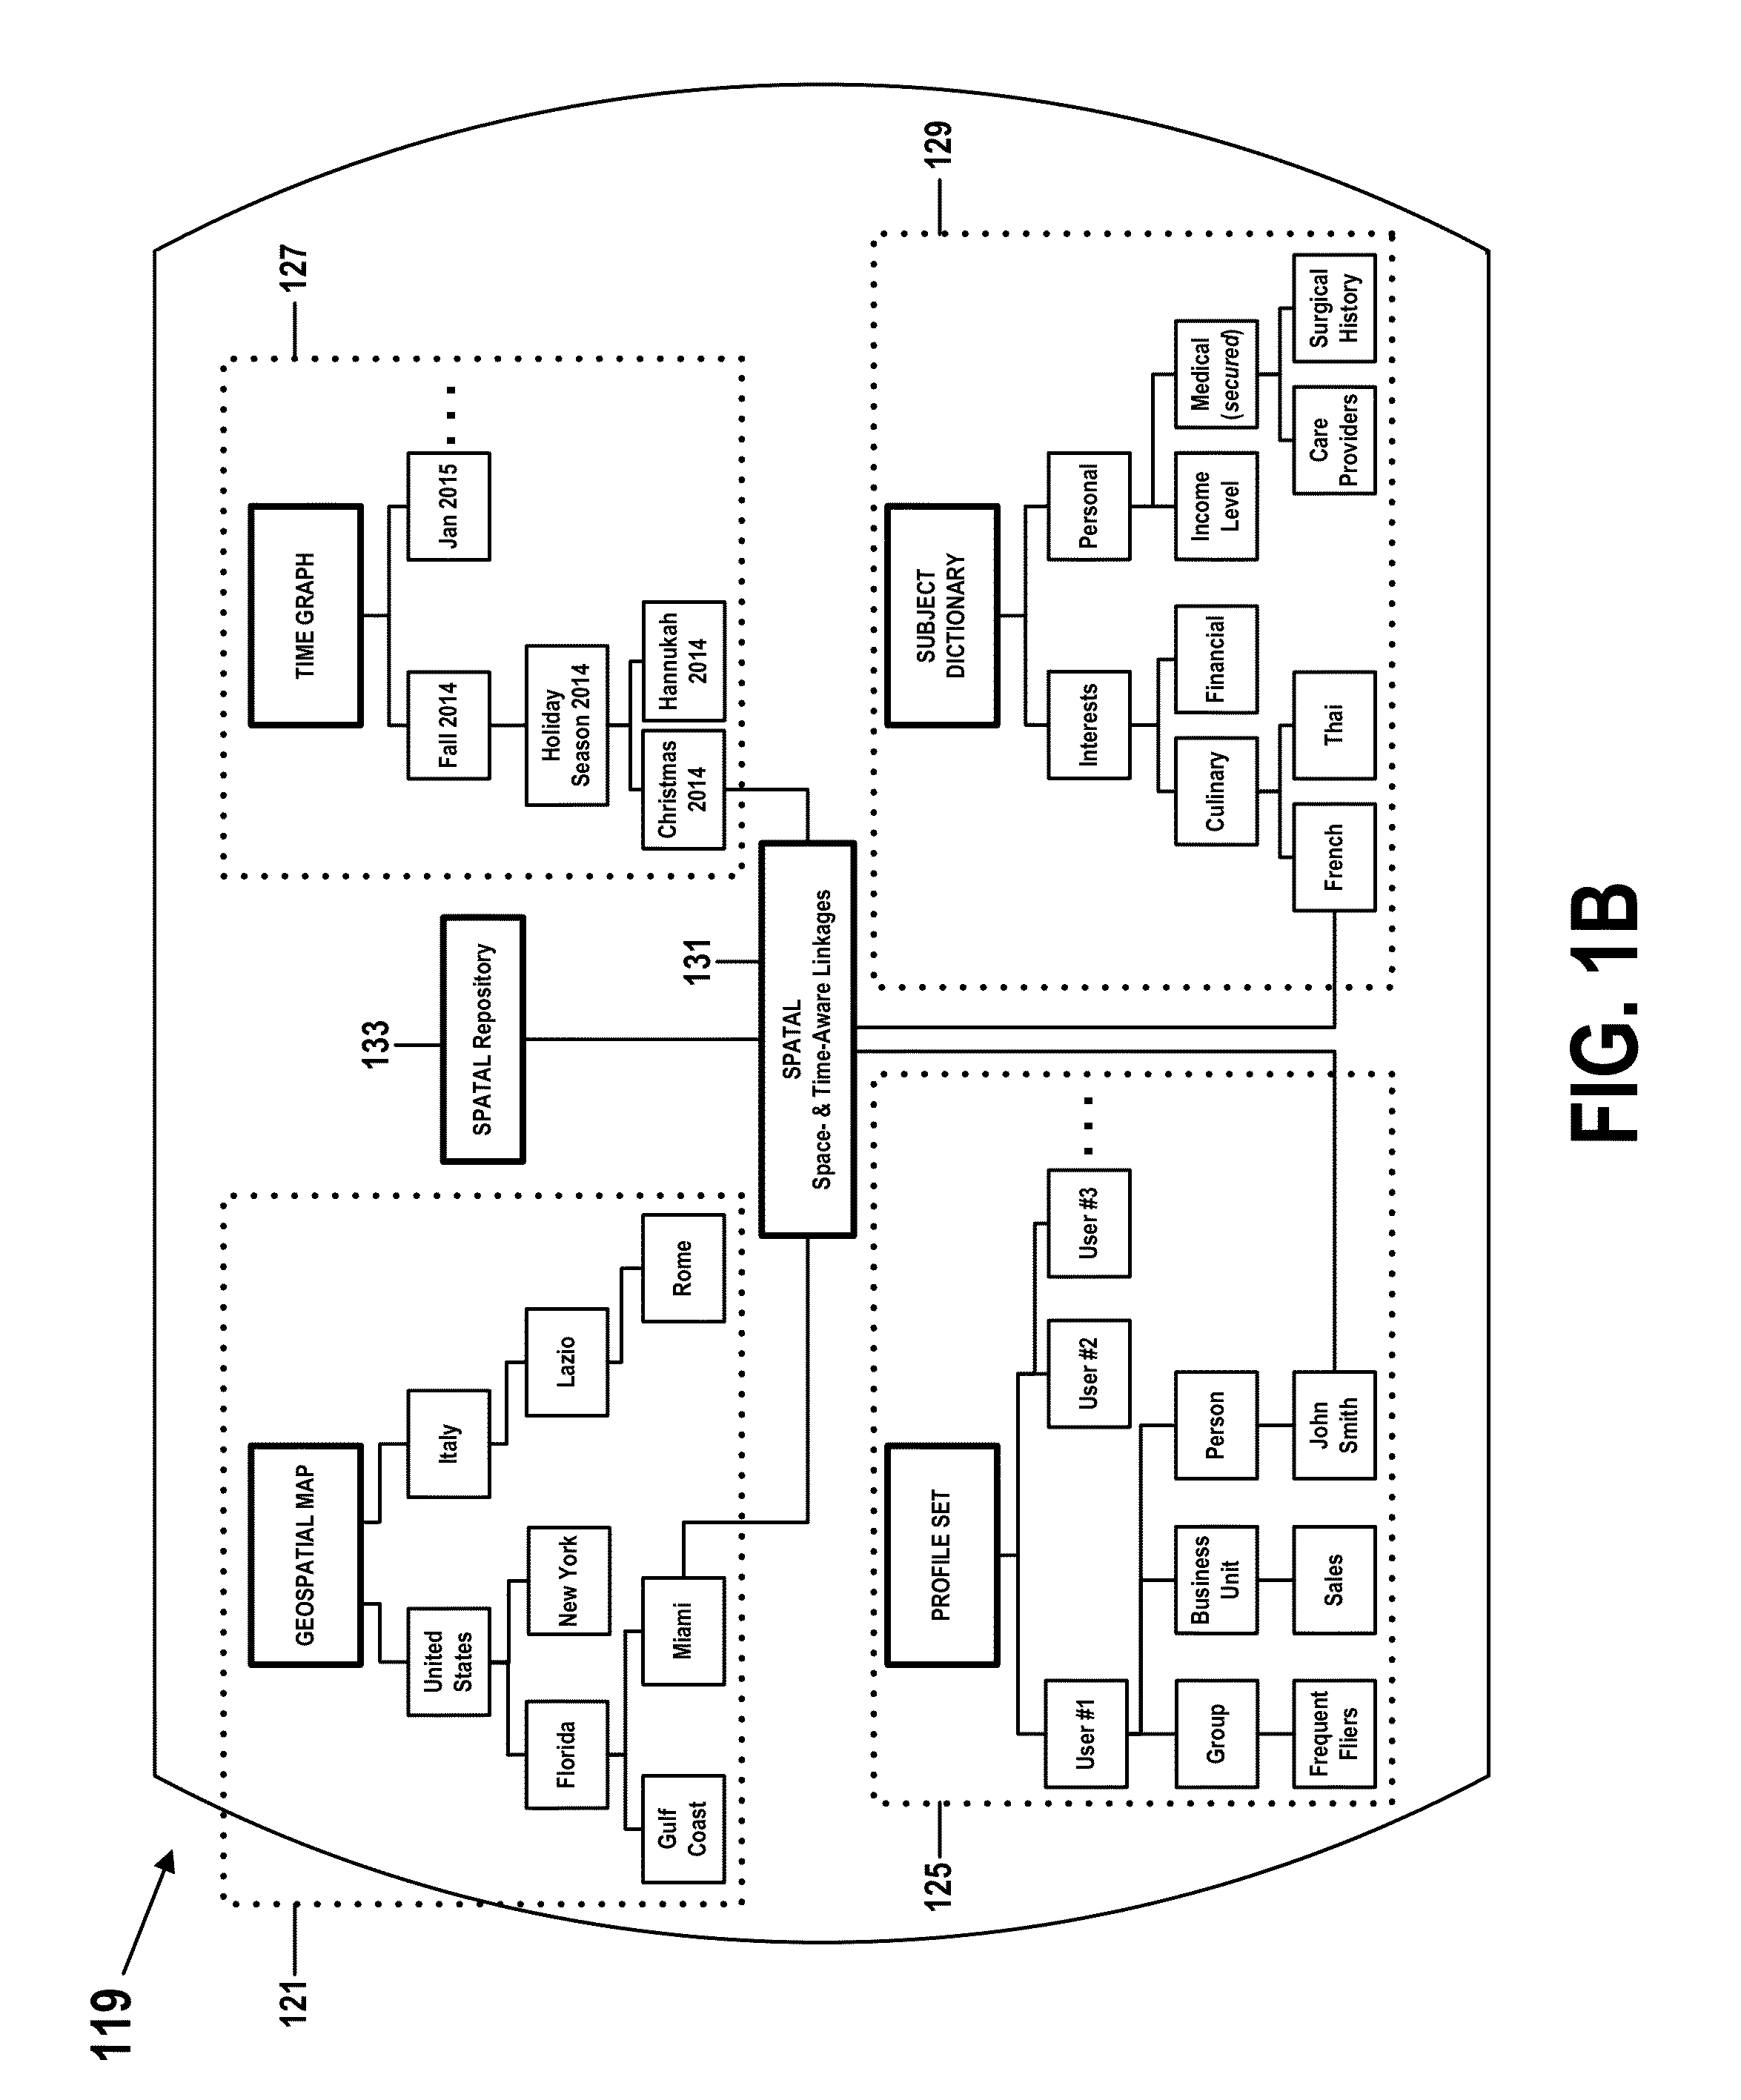 Representation of time-sensitive and space-sensitive profile information